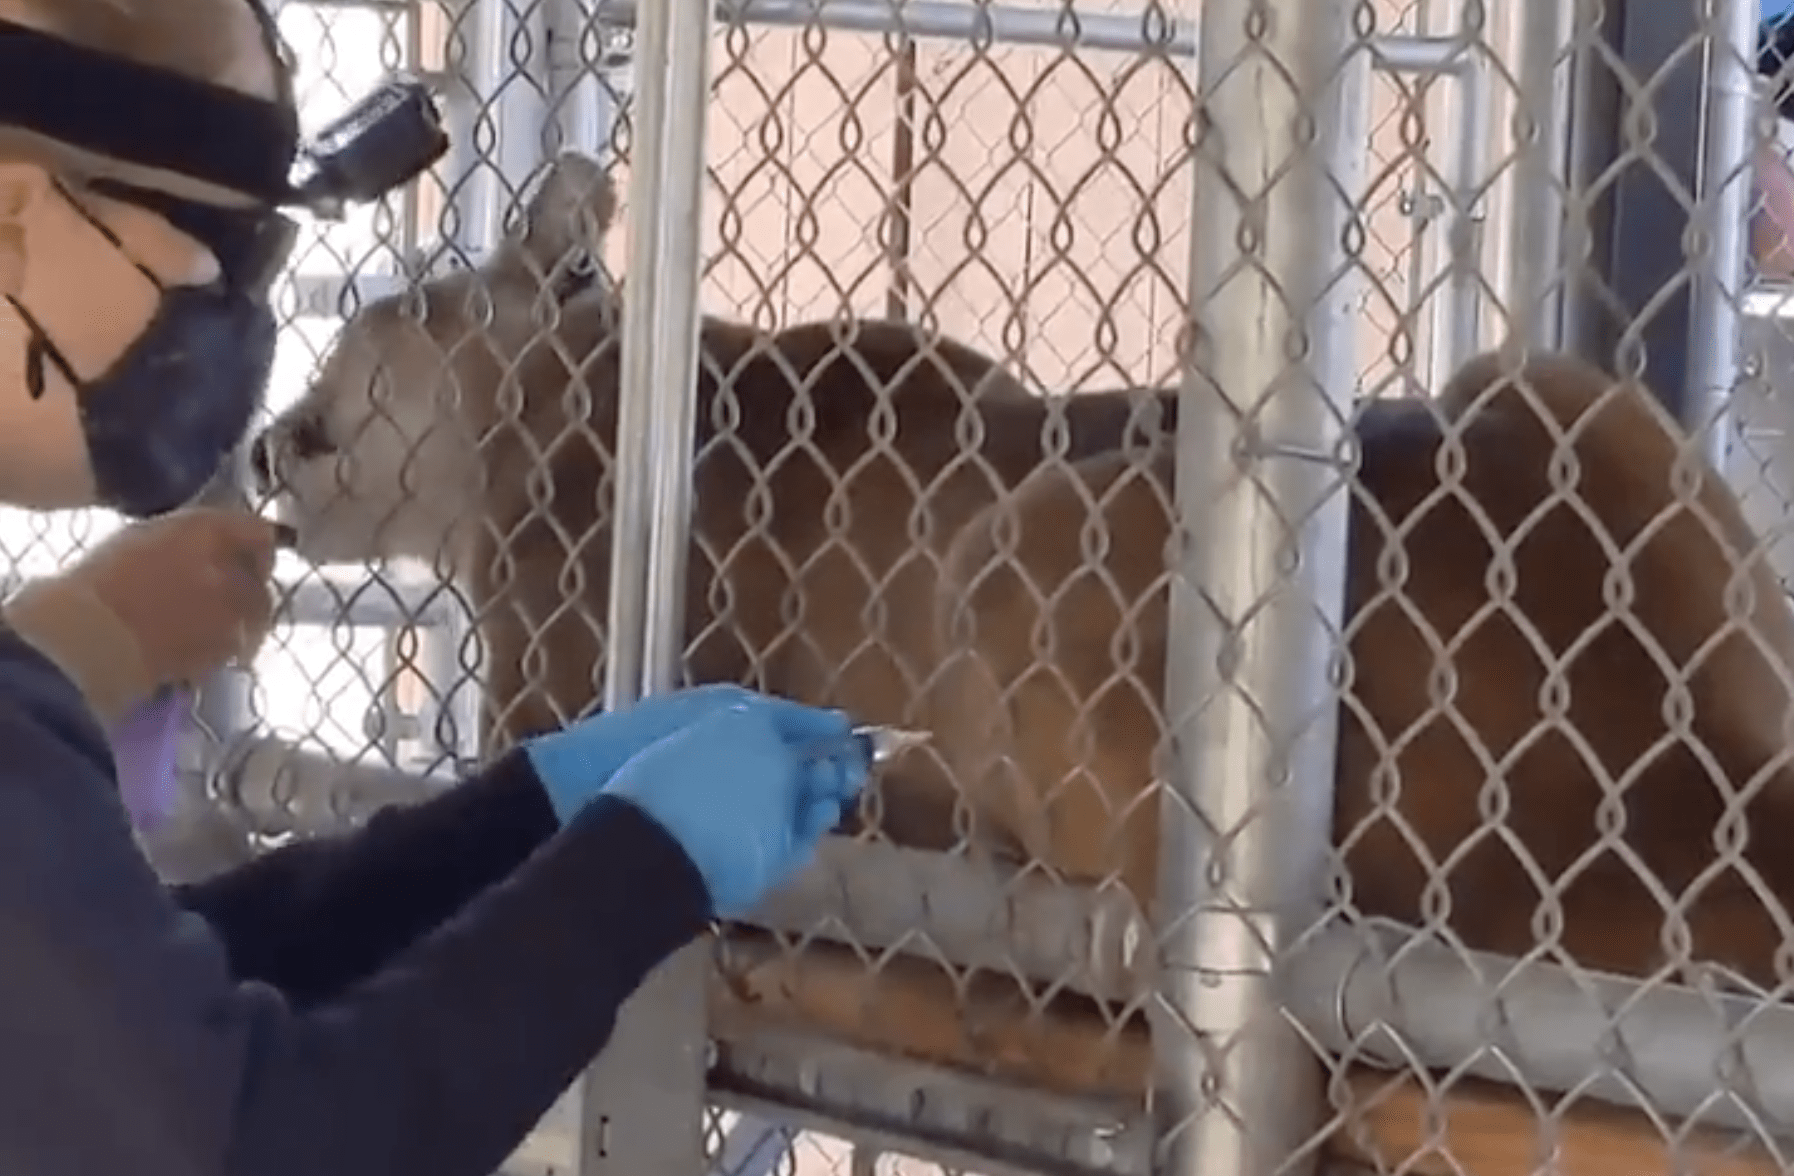 WATCH: Animals are being vaccinated for COVID 19